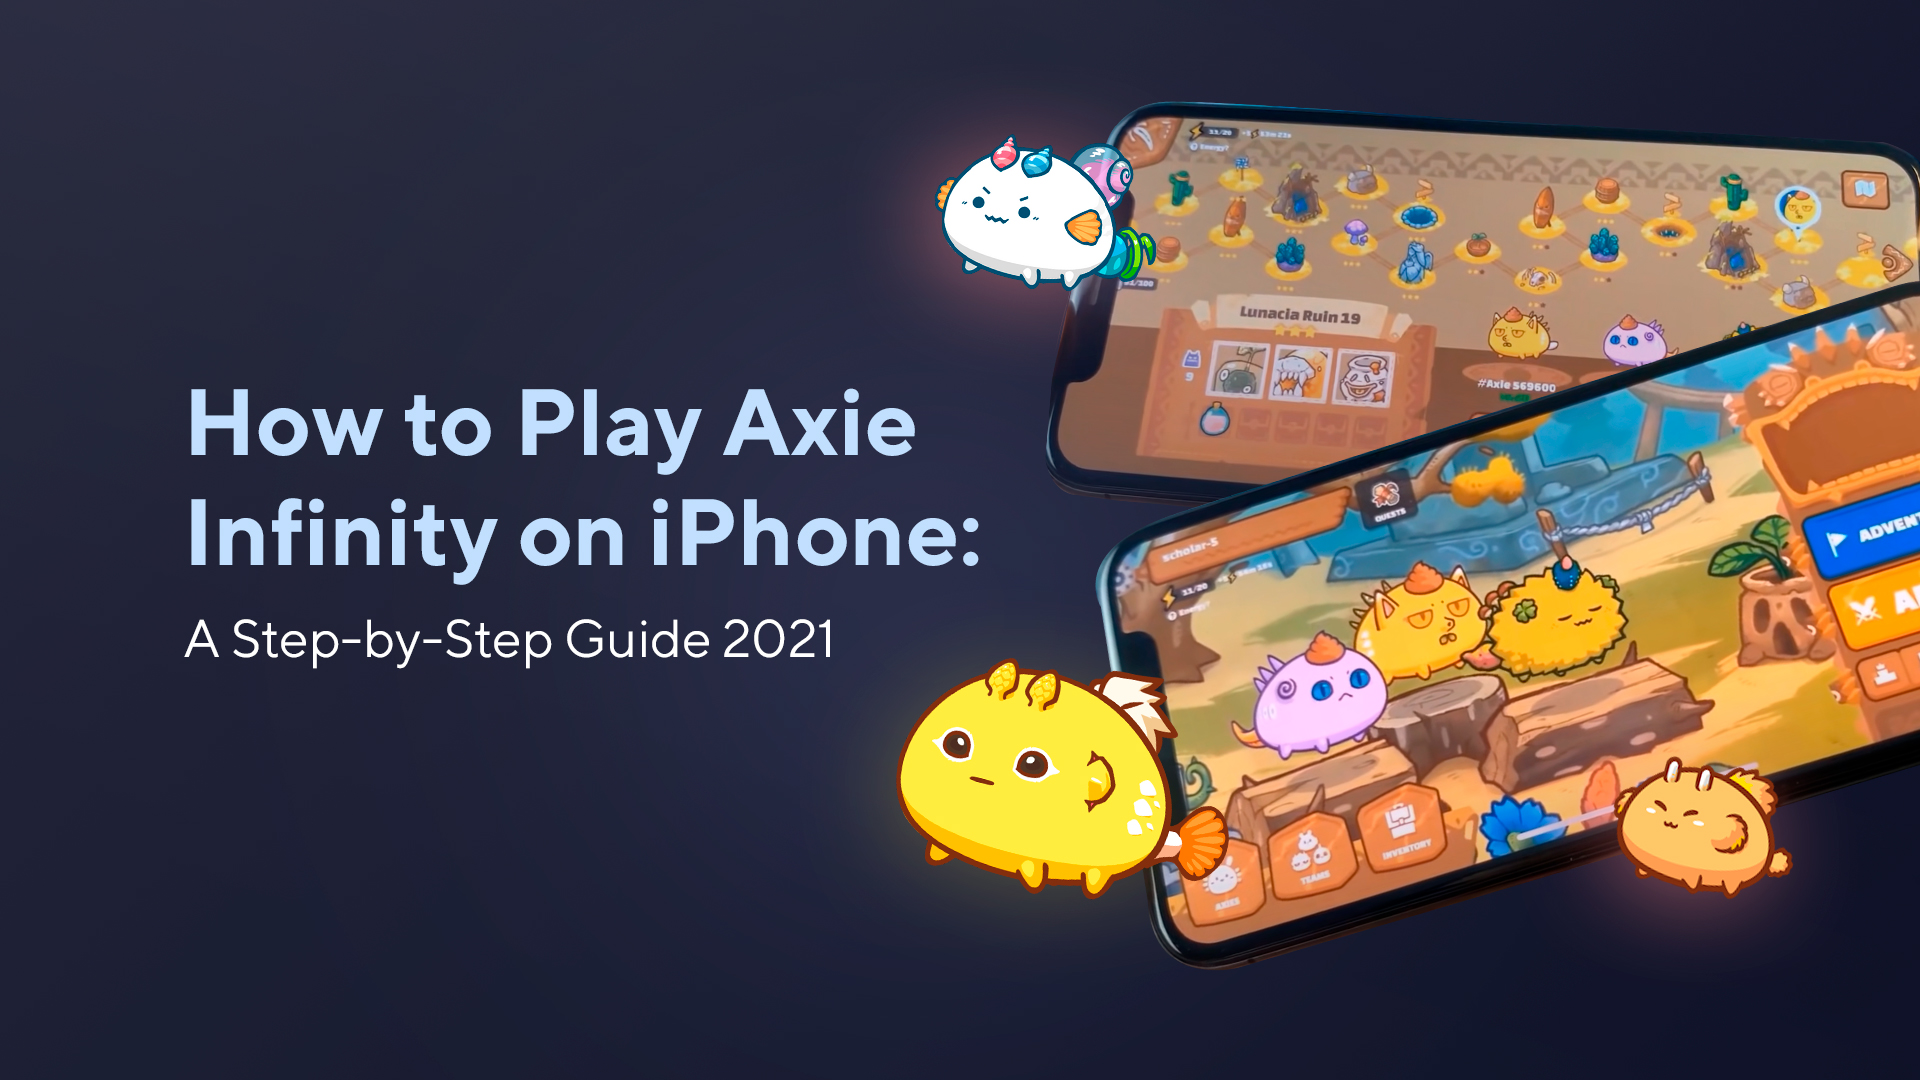 How to Play Axie Infinity on iPhone: A Step-by-Step Guide 2023